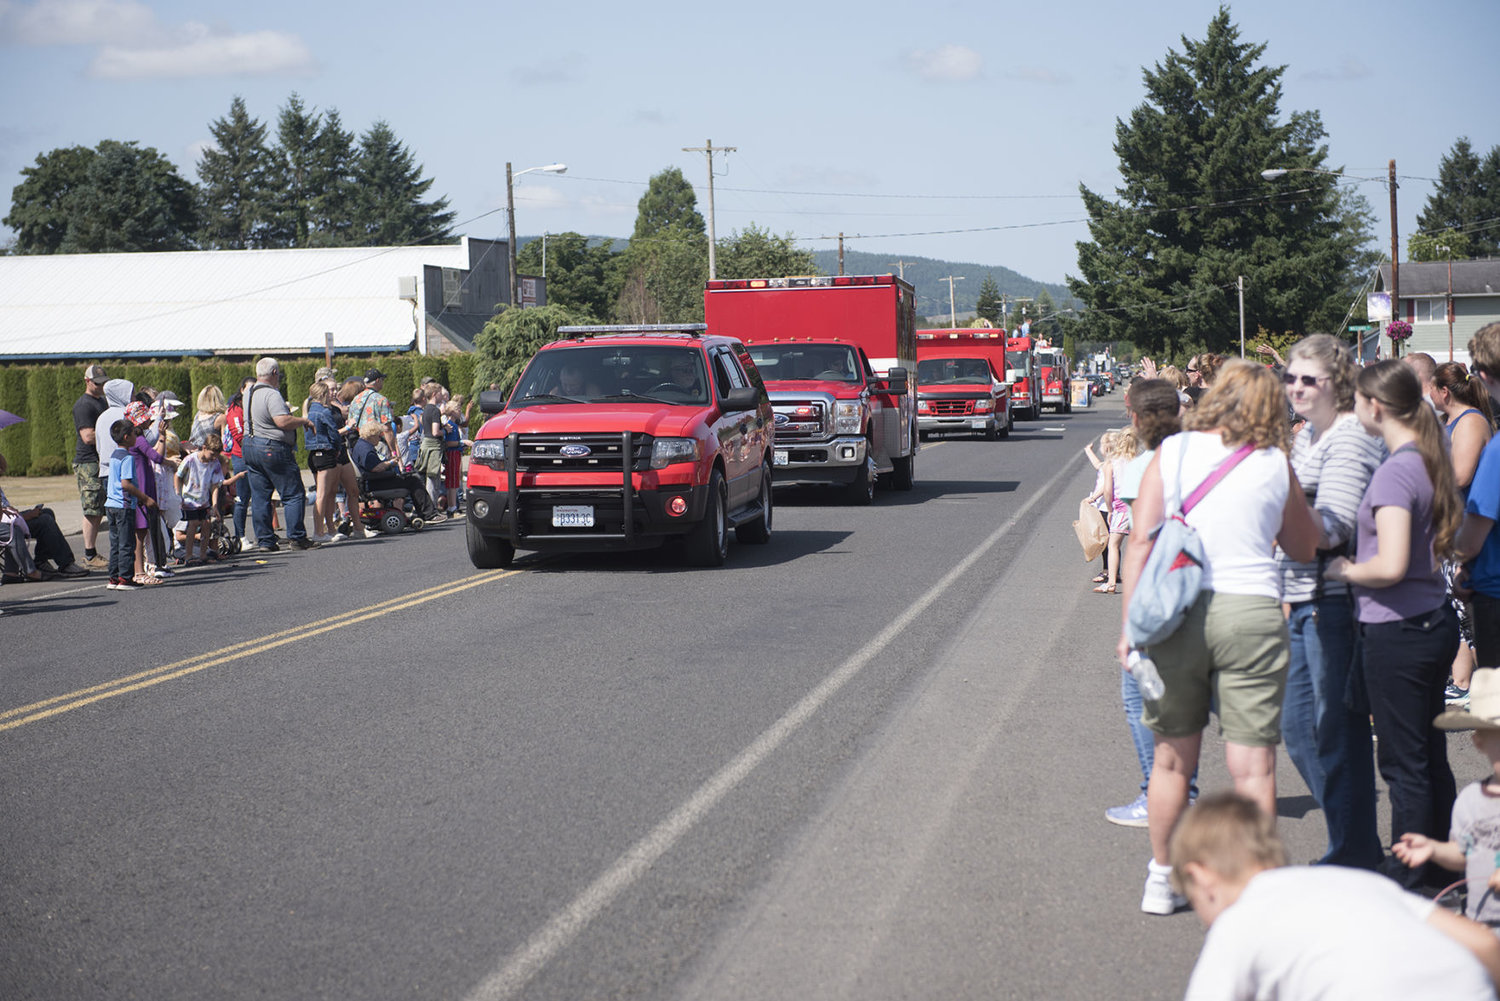 A procession of vehicle’s from the Mossyrock Fire Department take to the street during the Mossyrock Blueberry Festival parade on Saturday, Aug. 3, 2019.